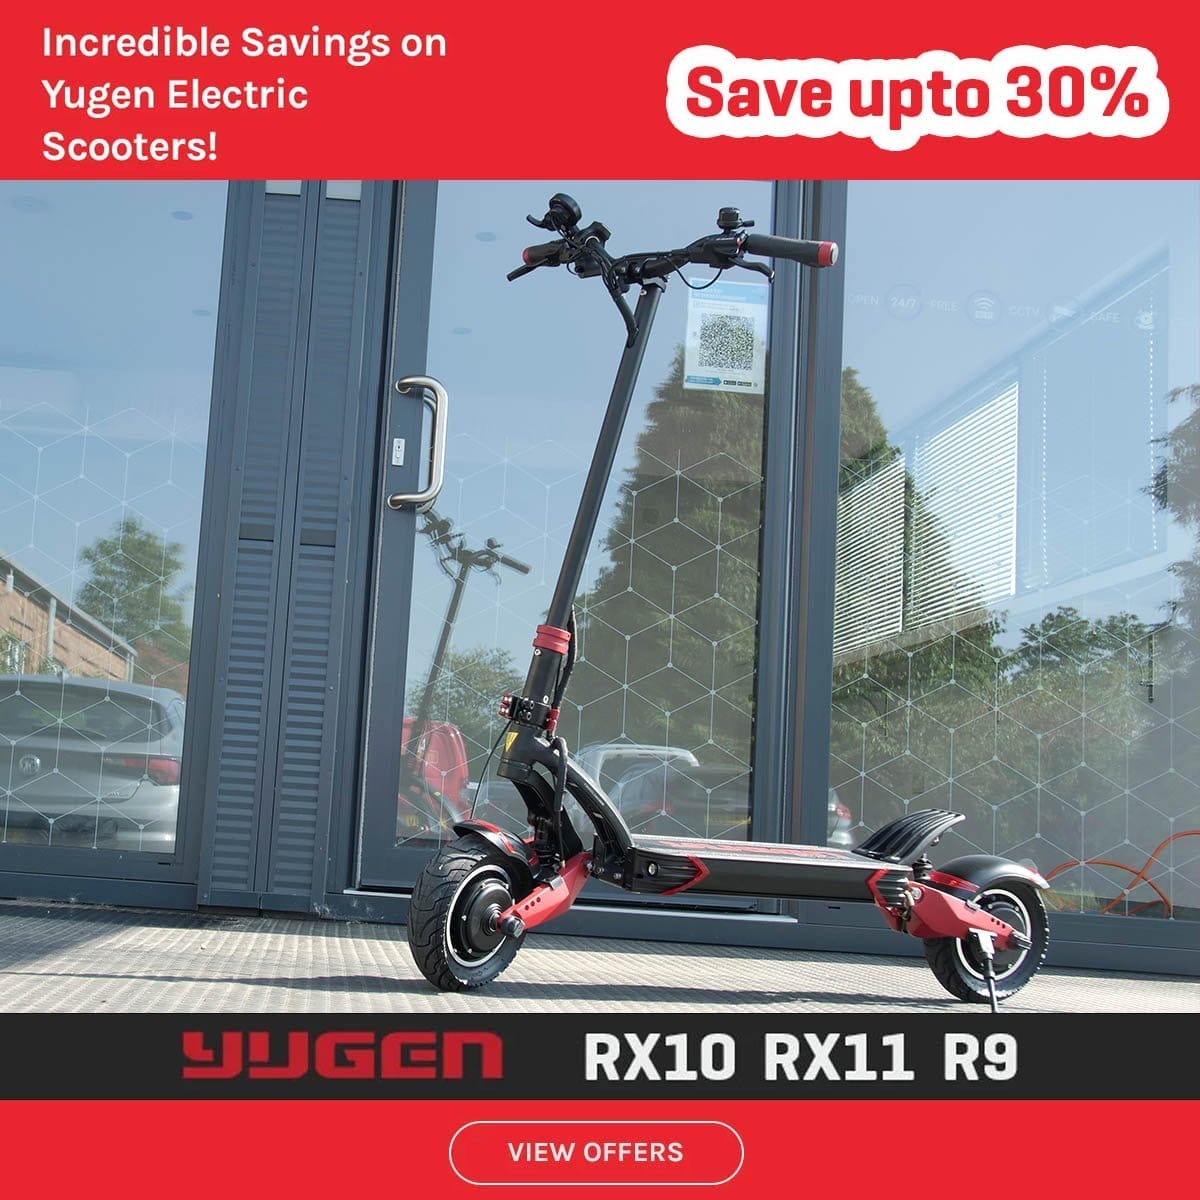 Up To 30% Off Yugen Electric Scooters